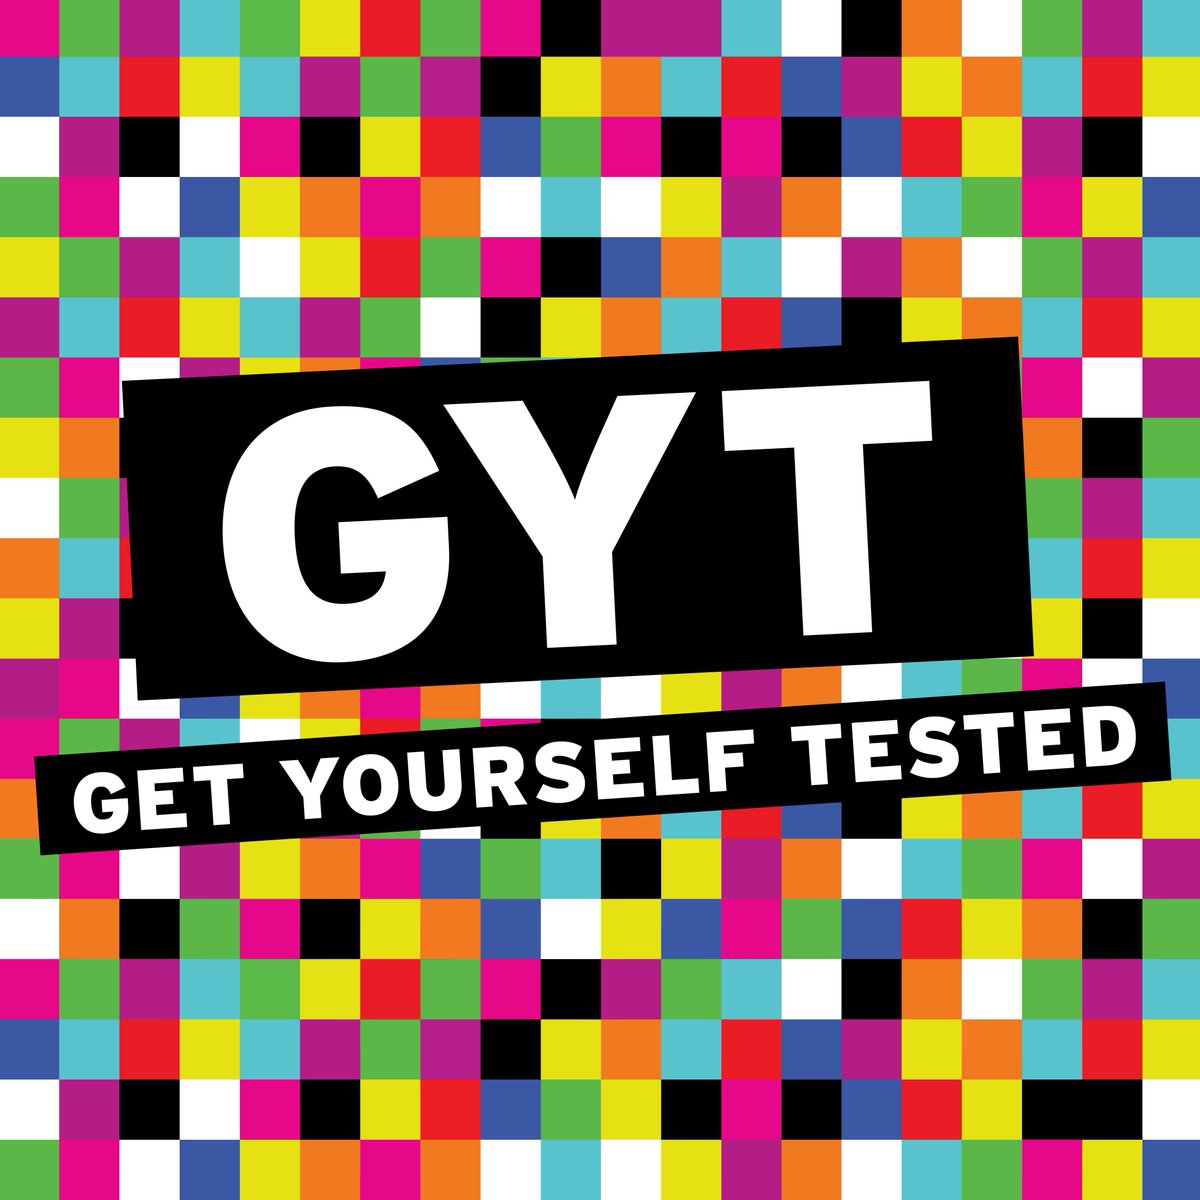 STI Awareness Week is here! Join the conversation with #STIweek to get involved and learn how you can take action to help overcome the rise of #STIs in the U.S. buff.ly/3IJxoHZ #GYT